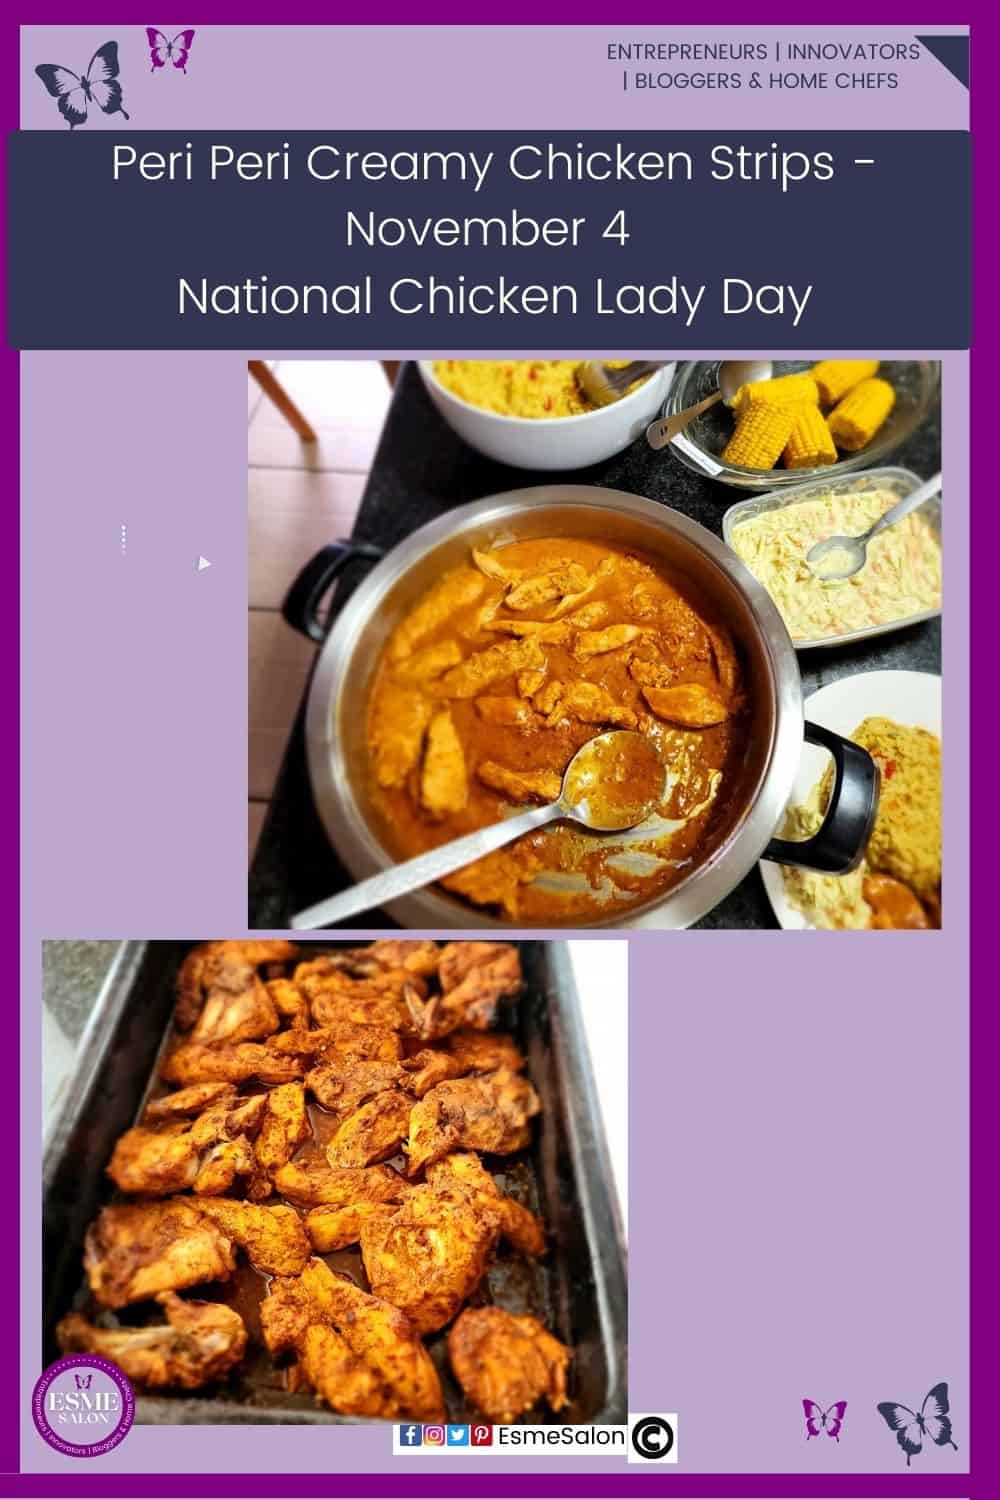 an image of a stainless steel dish with Peri Peri Creamy Chicken Strips as well as a table with rice, corn on the cob and a pot of chicken in the peri peri sauce